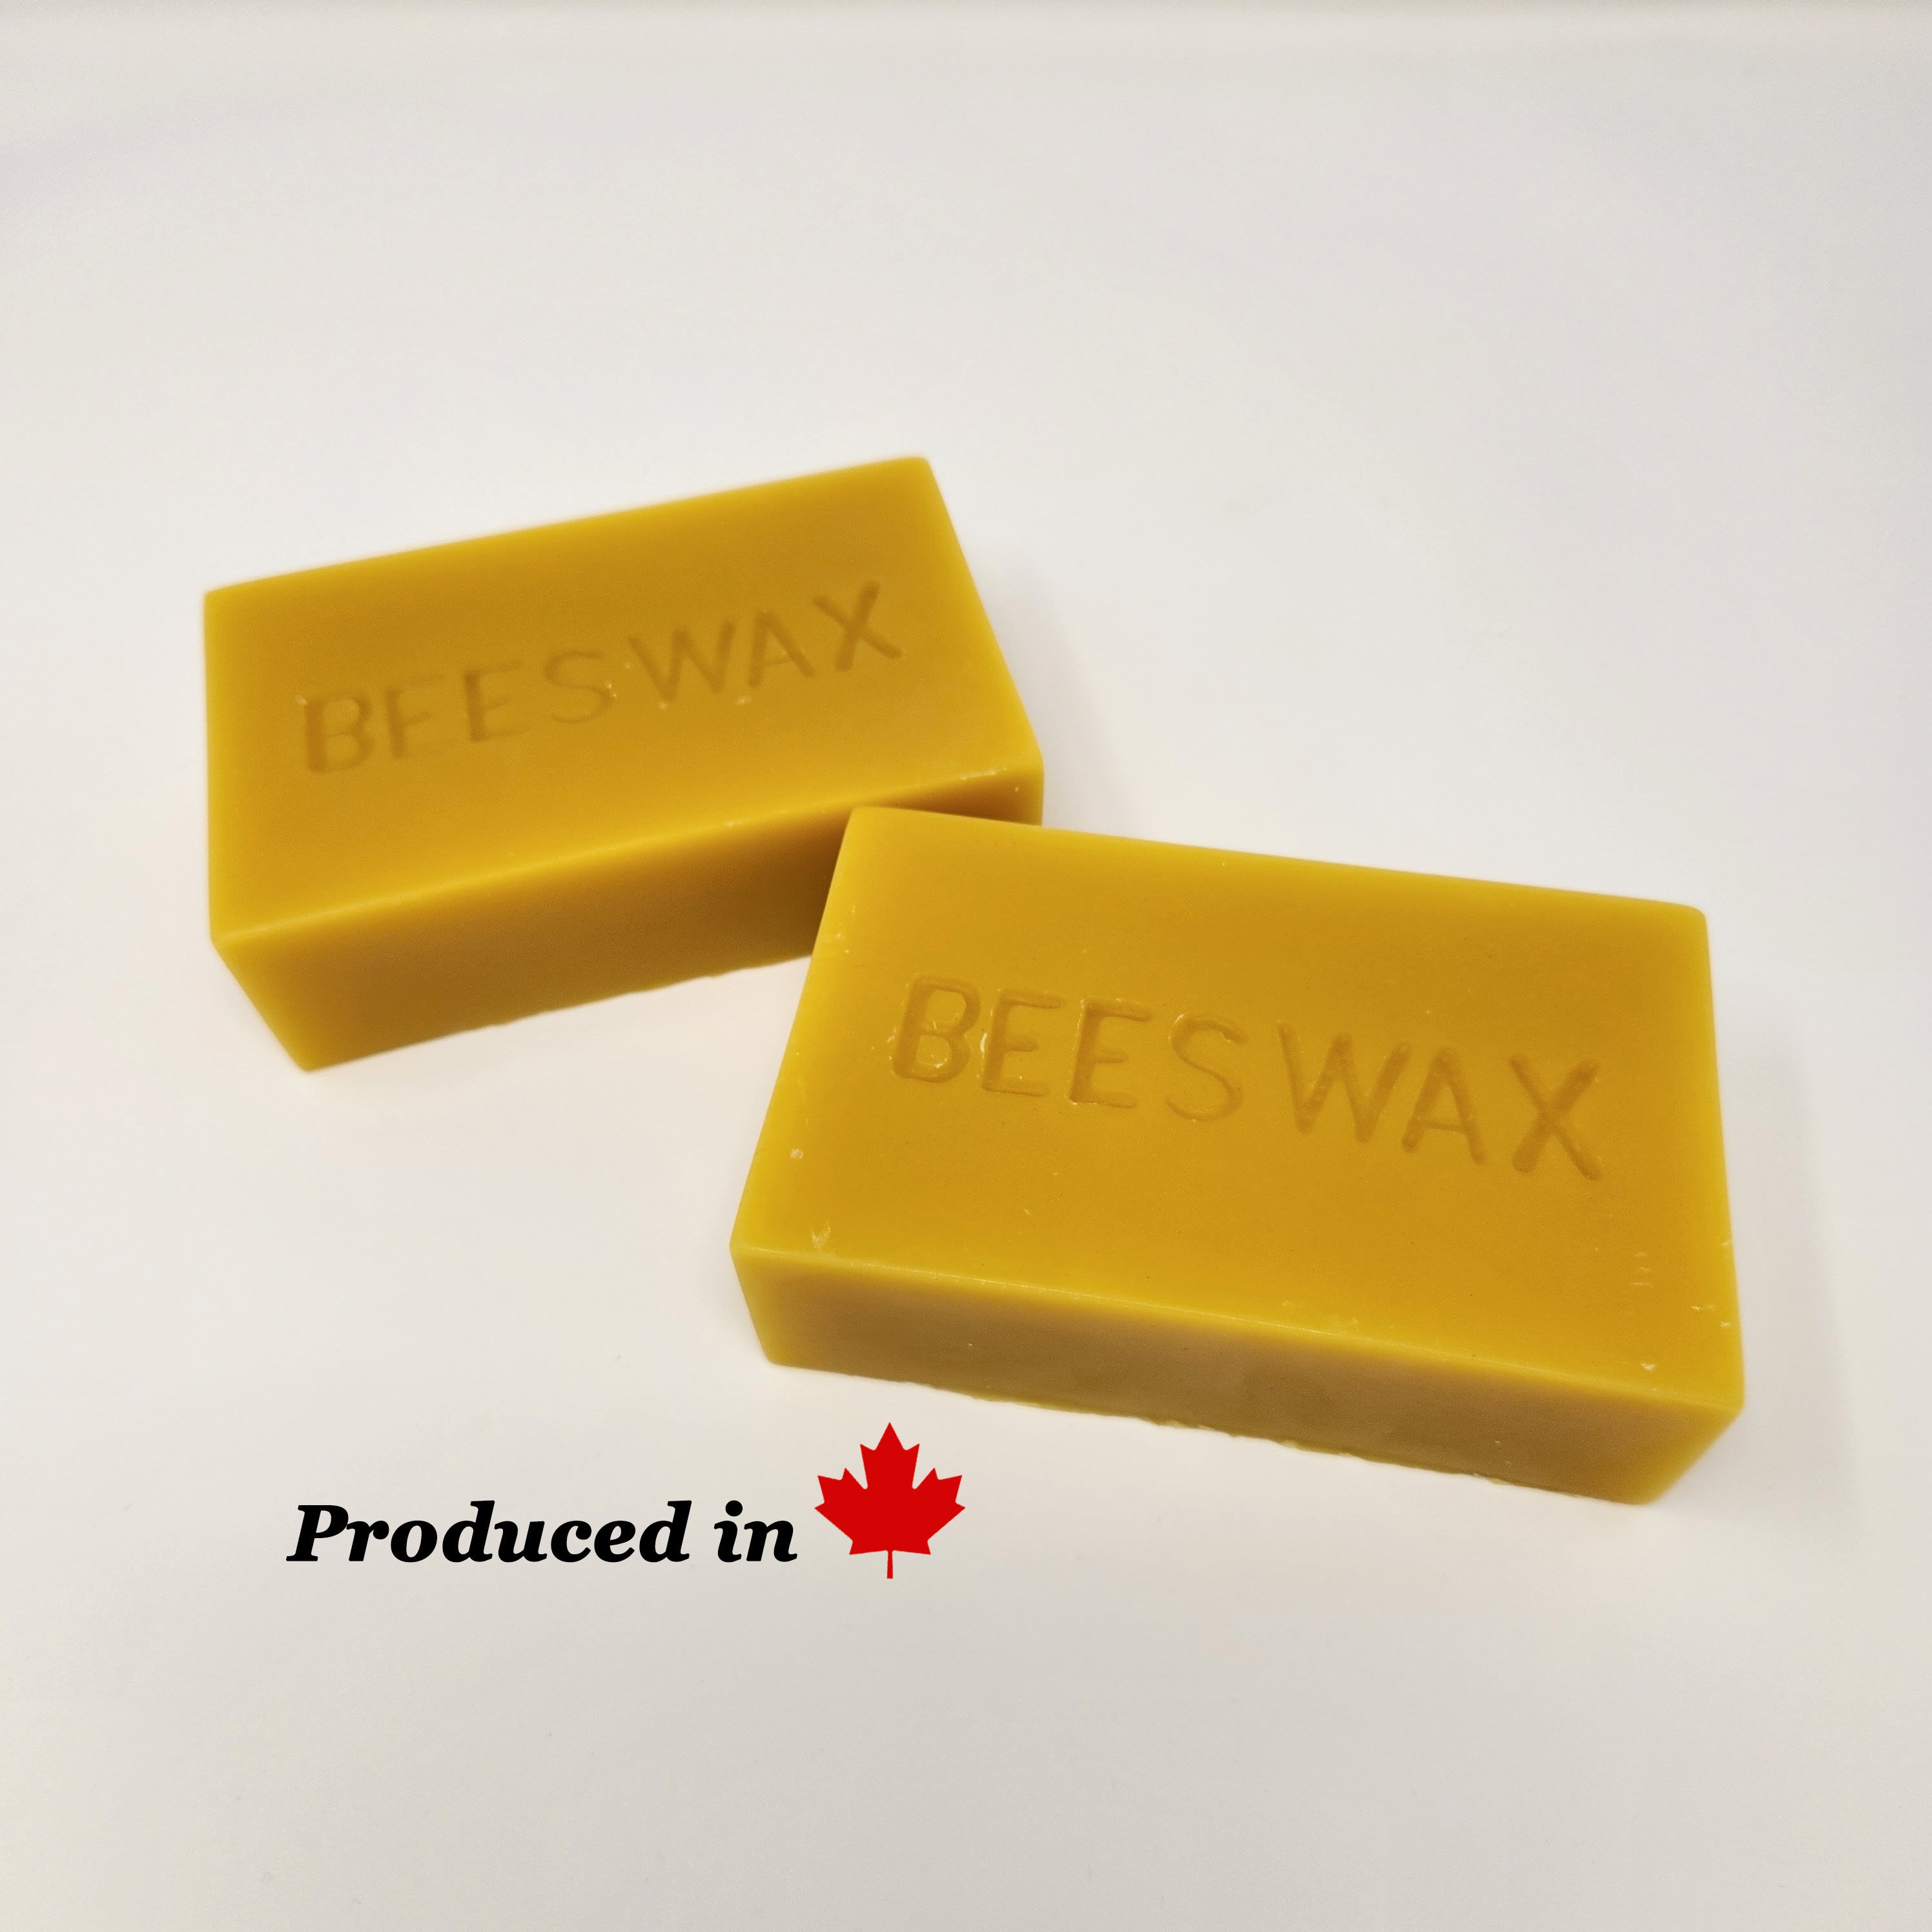 Pure Beeswax Block - 2, 5 lbs by Mann Lake